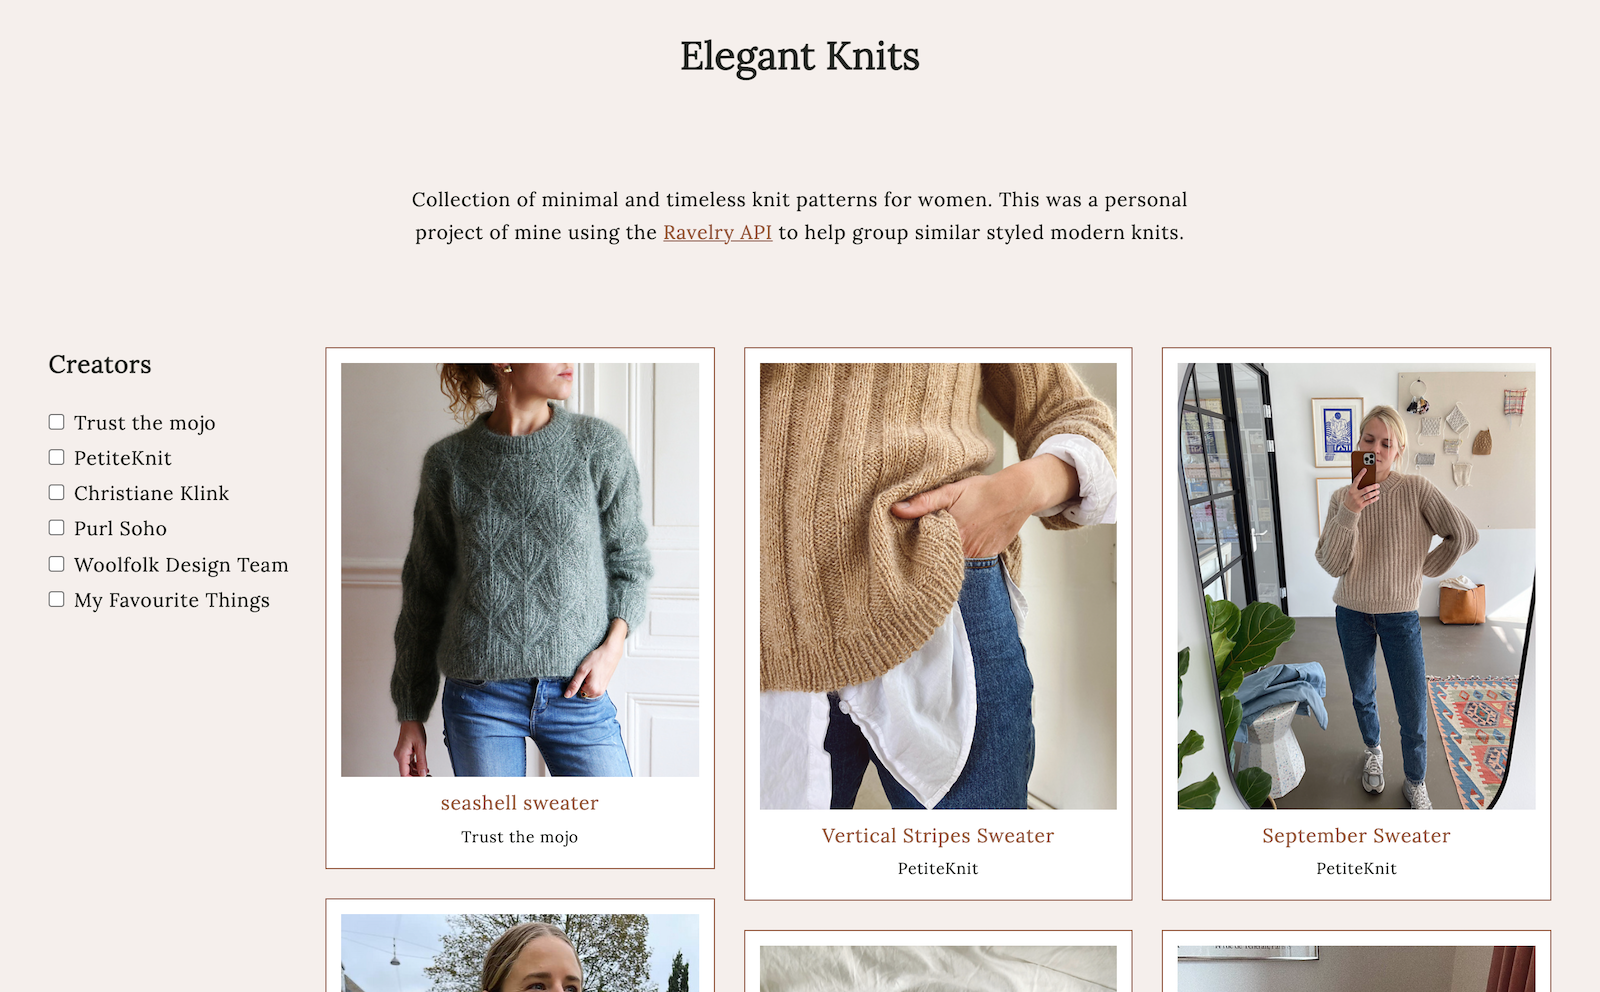 Collection of knit patterns from Ravelry